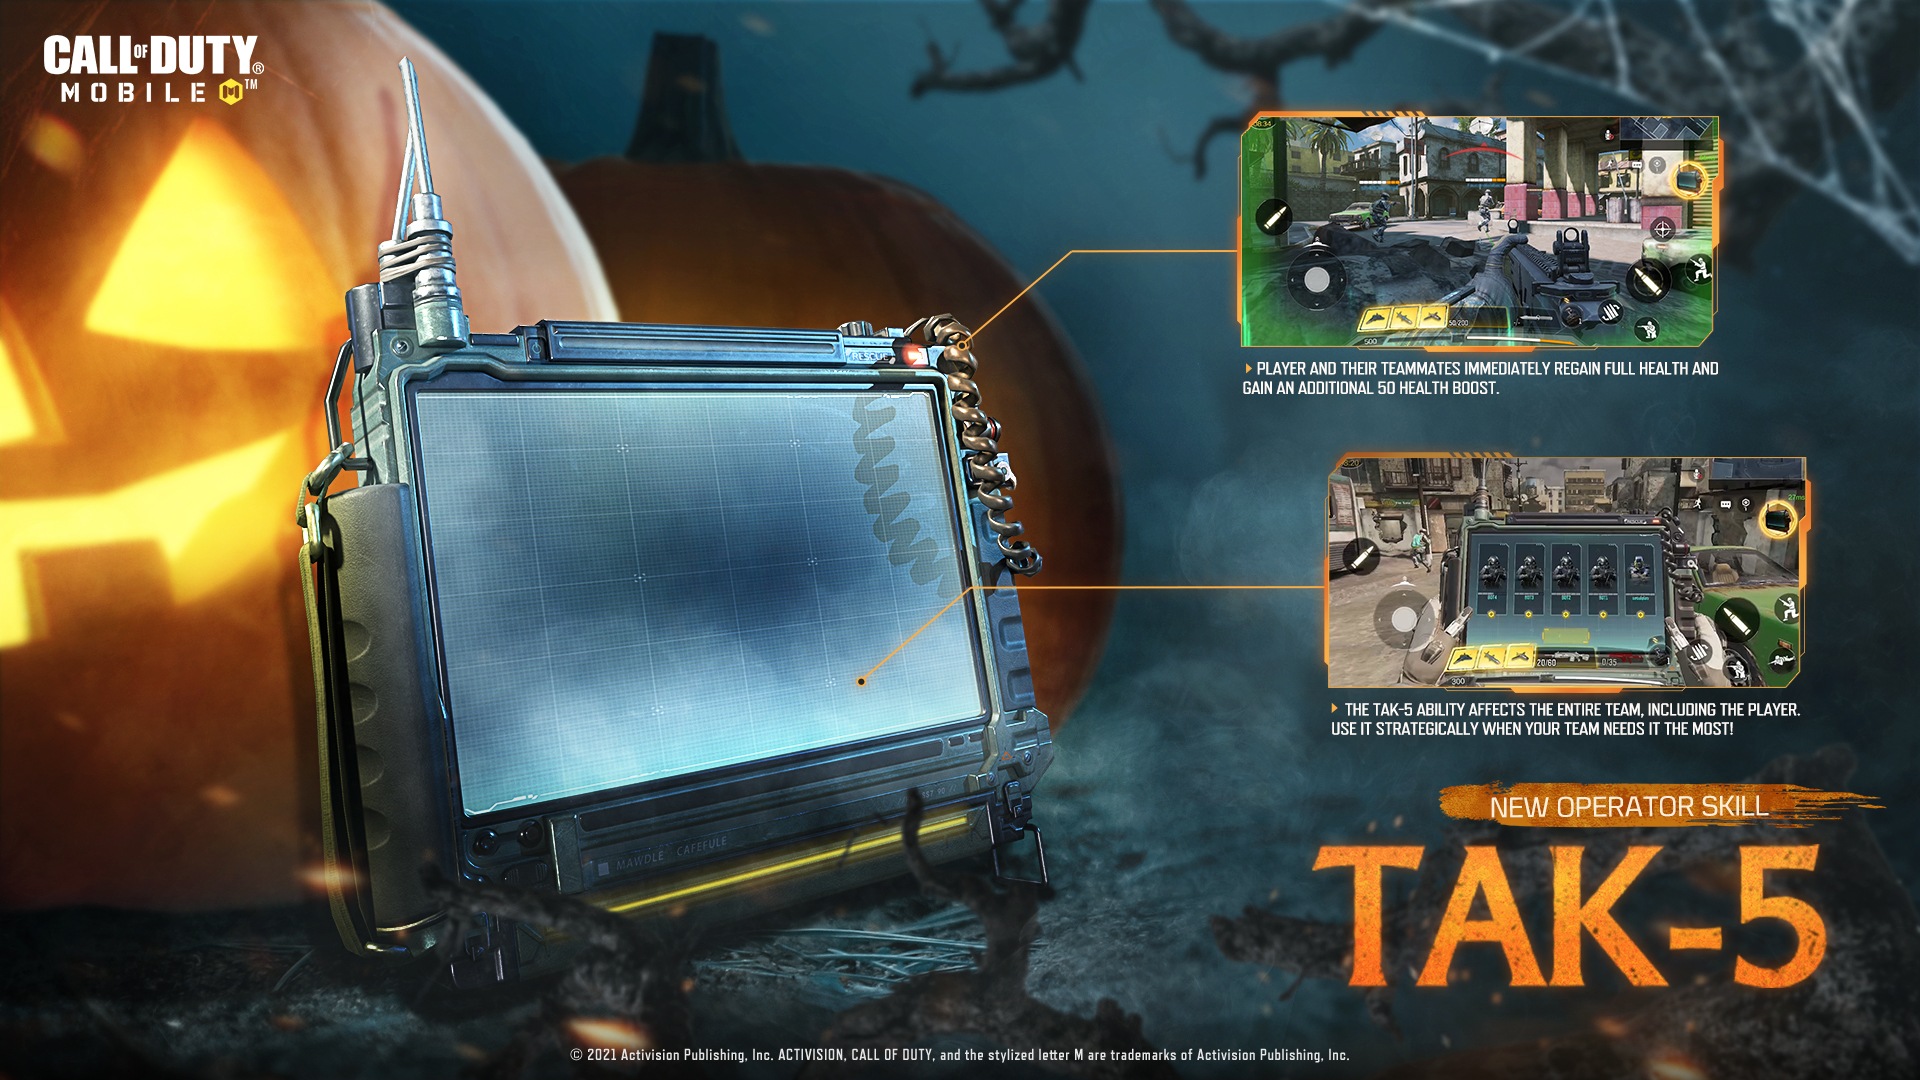 Call of Duty: Mobile Season 9 Update: Havoc Sawmill Map, Swordfish, Halloween Event, and More